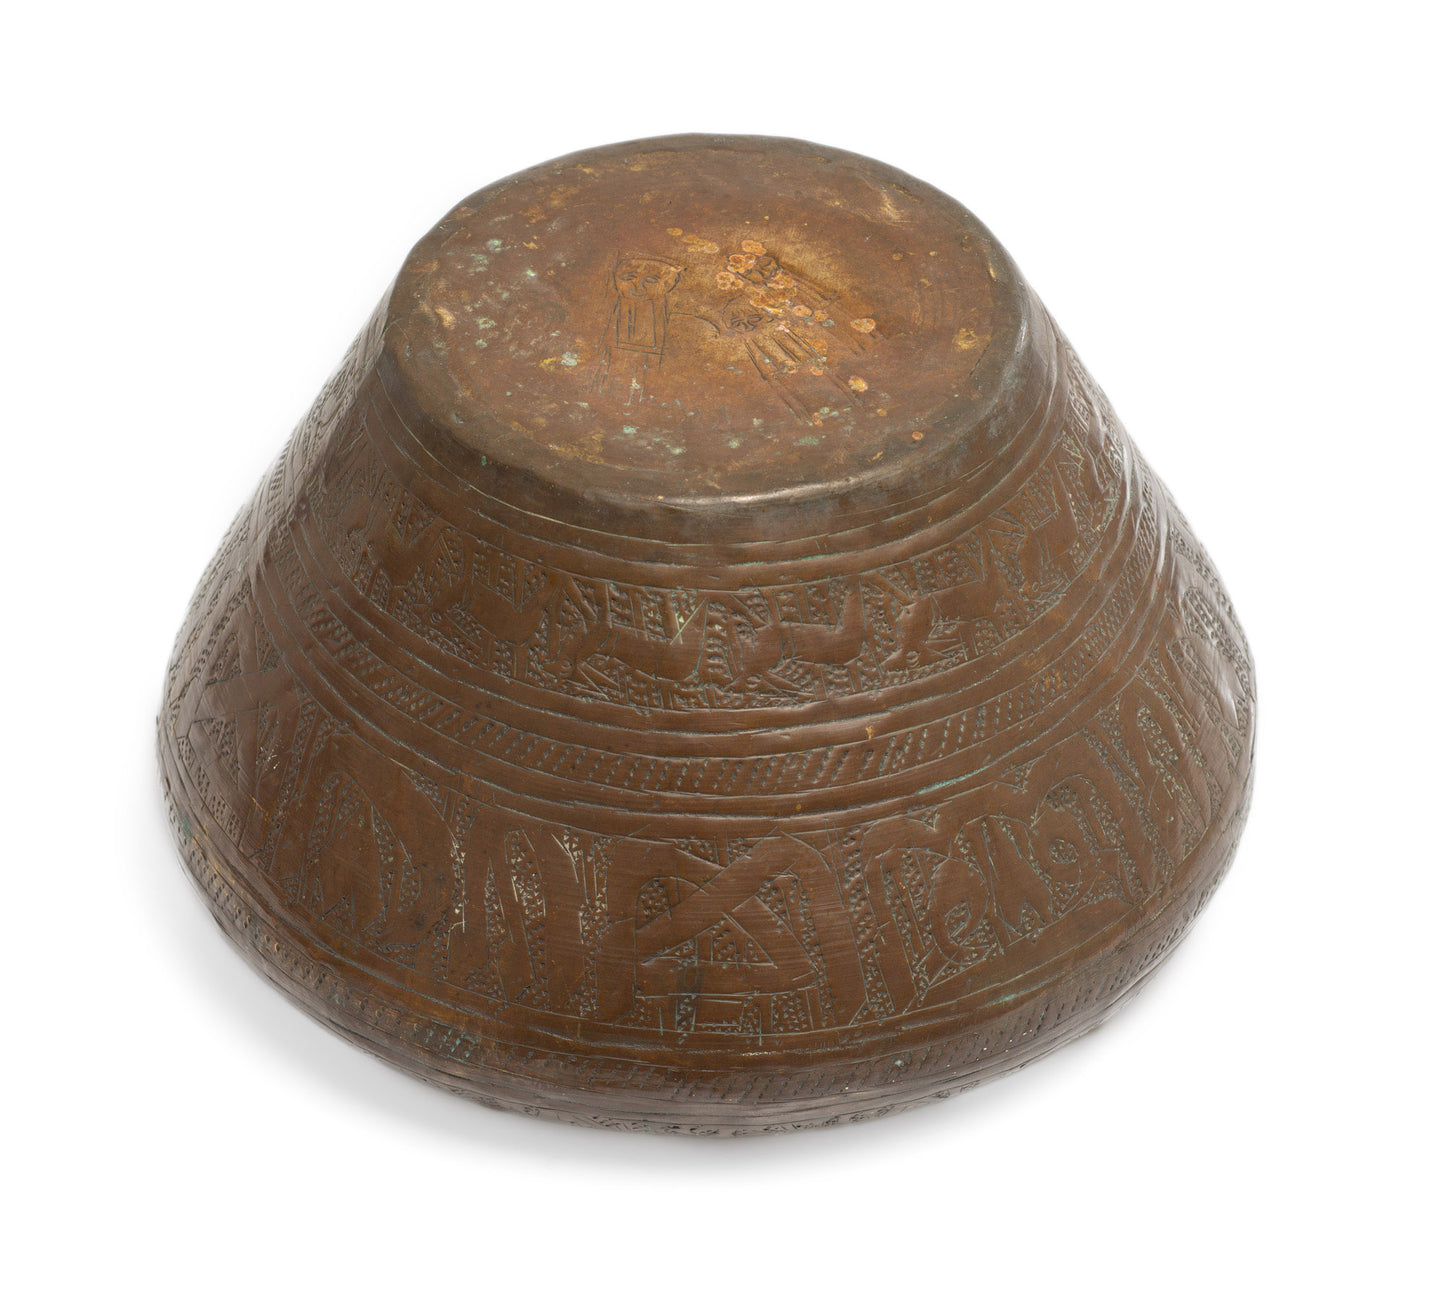 Antique Persian Qajar Coppered Brass Bowl/Vessel with Hidden Character Mark (Code 2670)